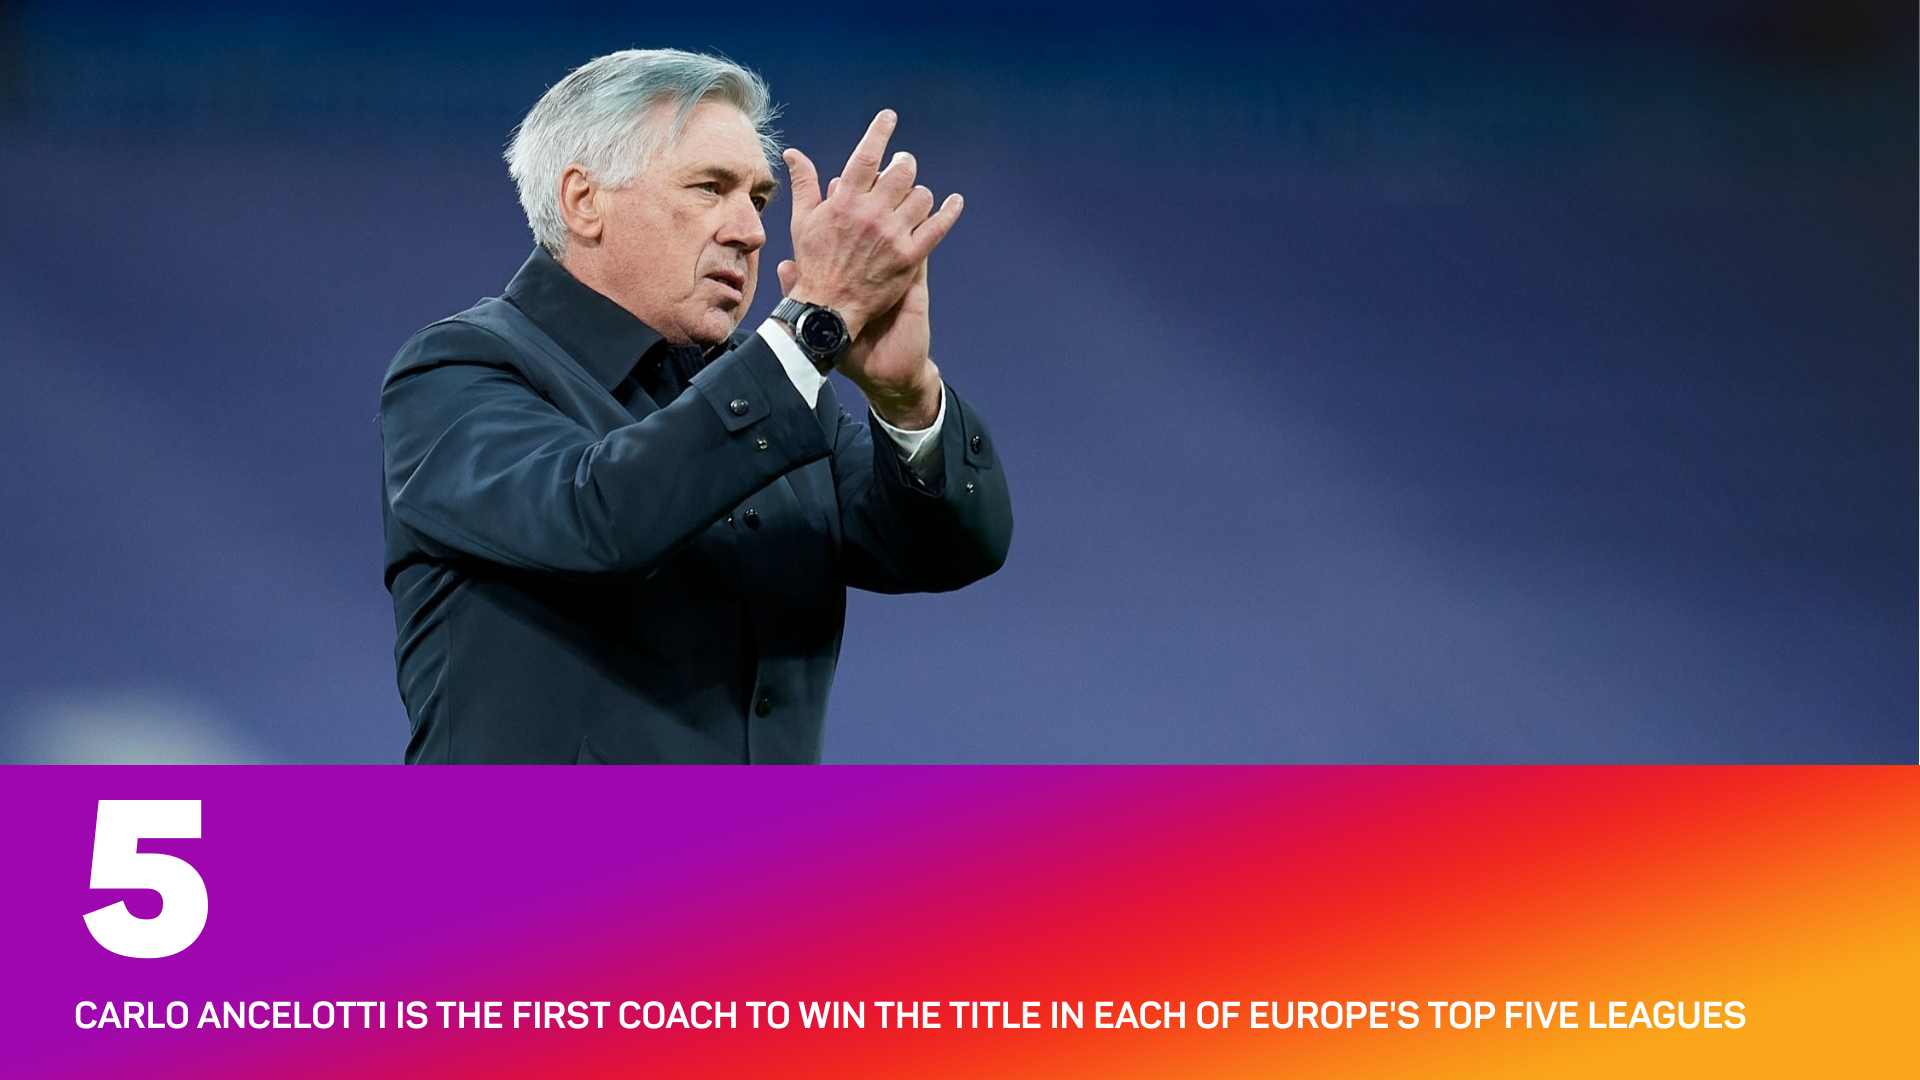 Carlo Ancelotti is the first coach to win the title in each of Europe's top five leagues